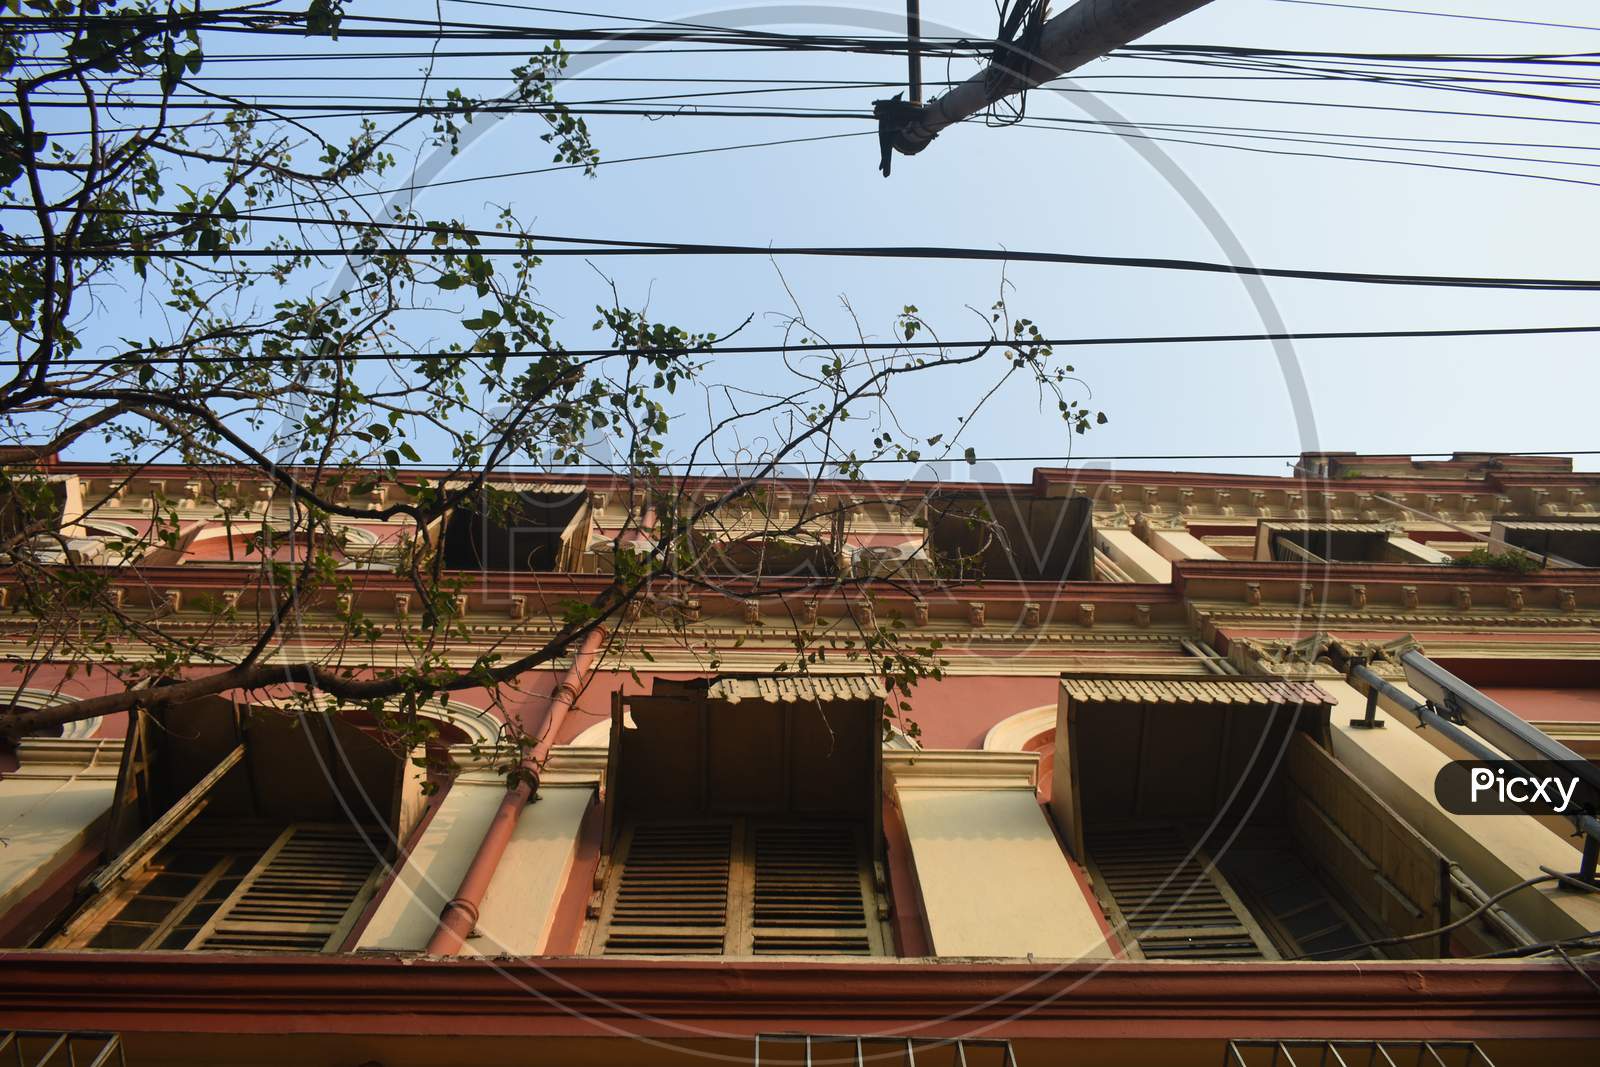 The wires near a building.